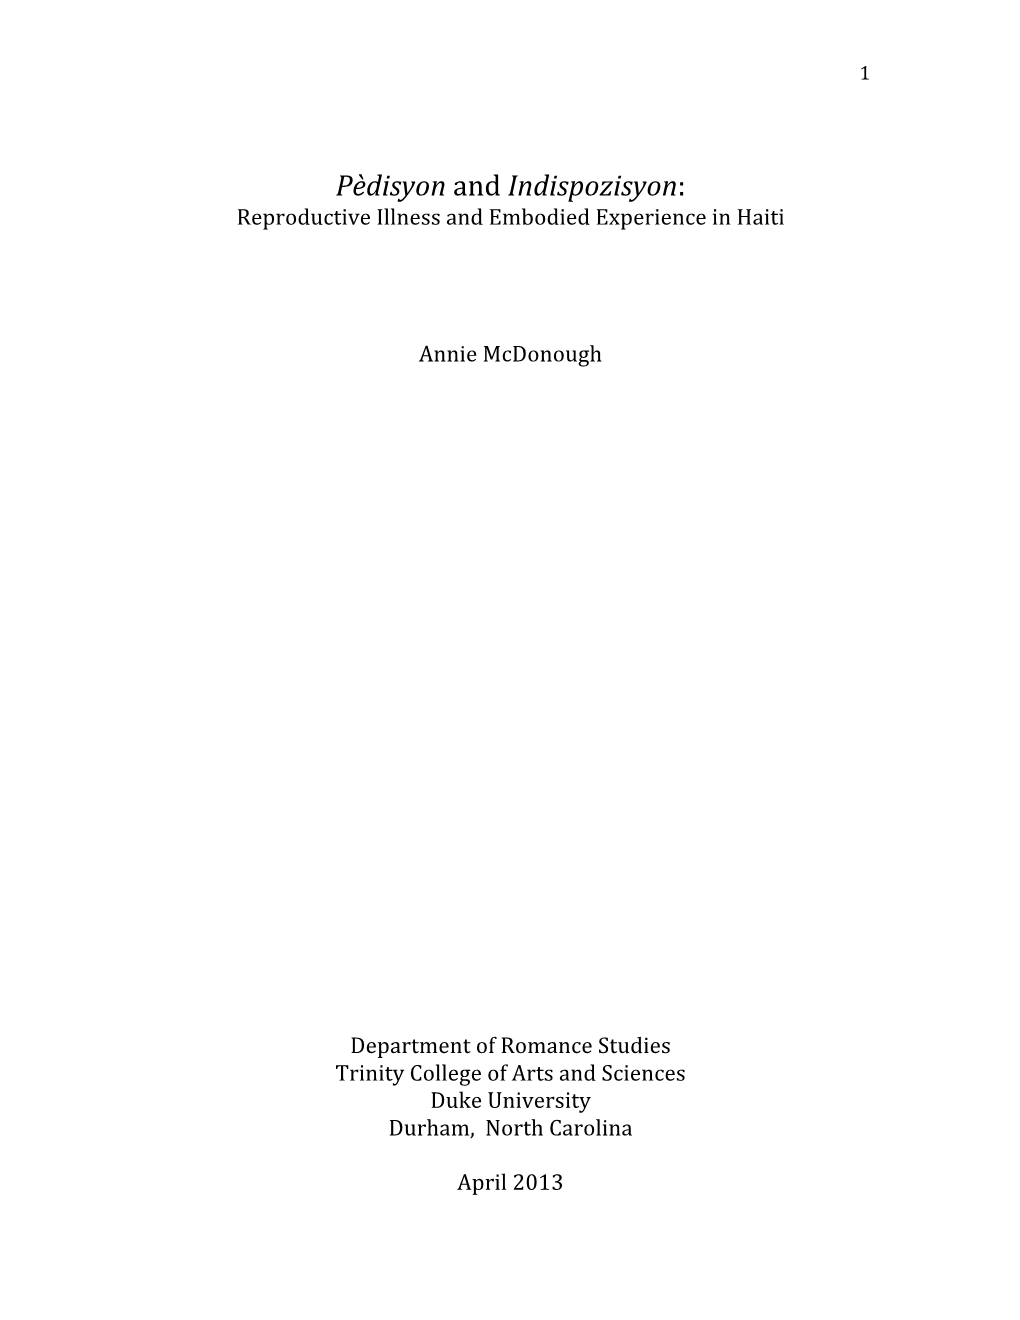 Pèdisyon and Indispozisyon: Reproductive Illness and Embodied Experience in Haiti